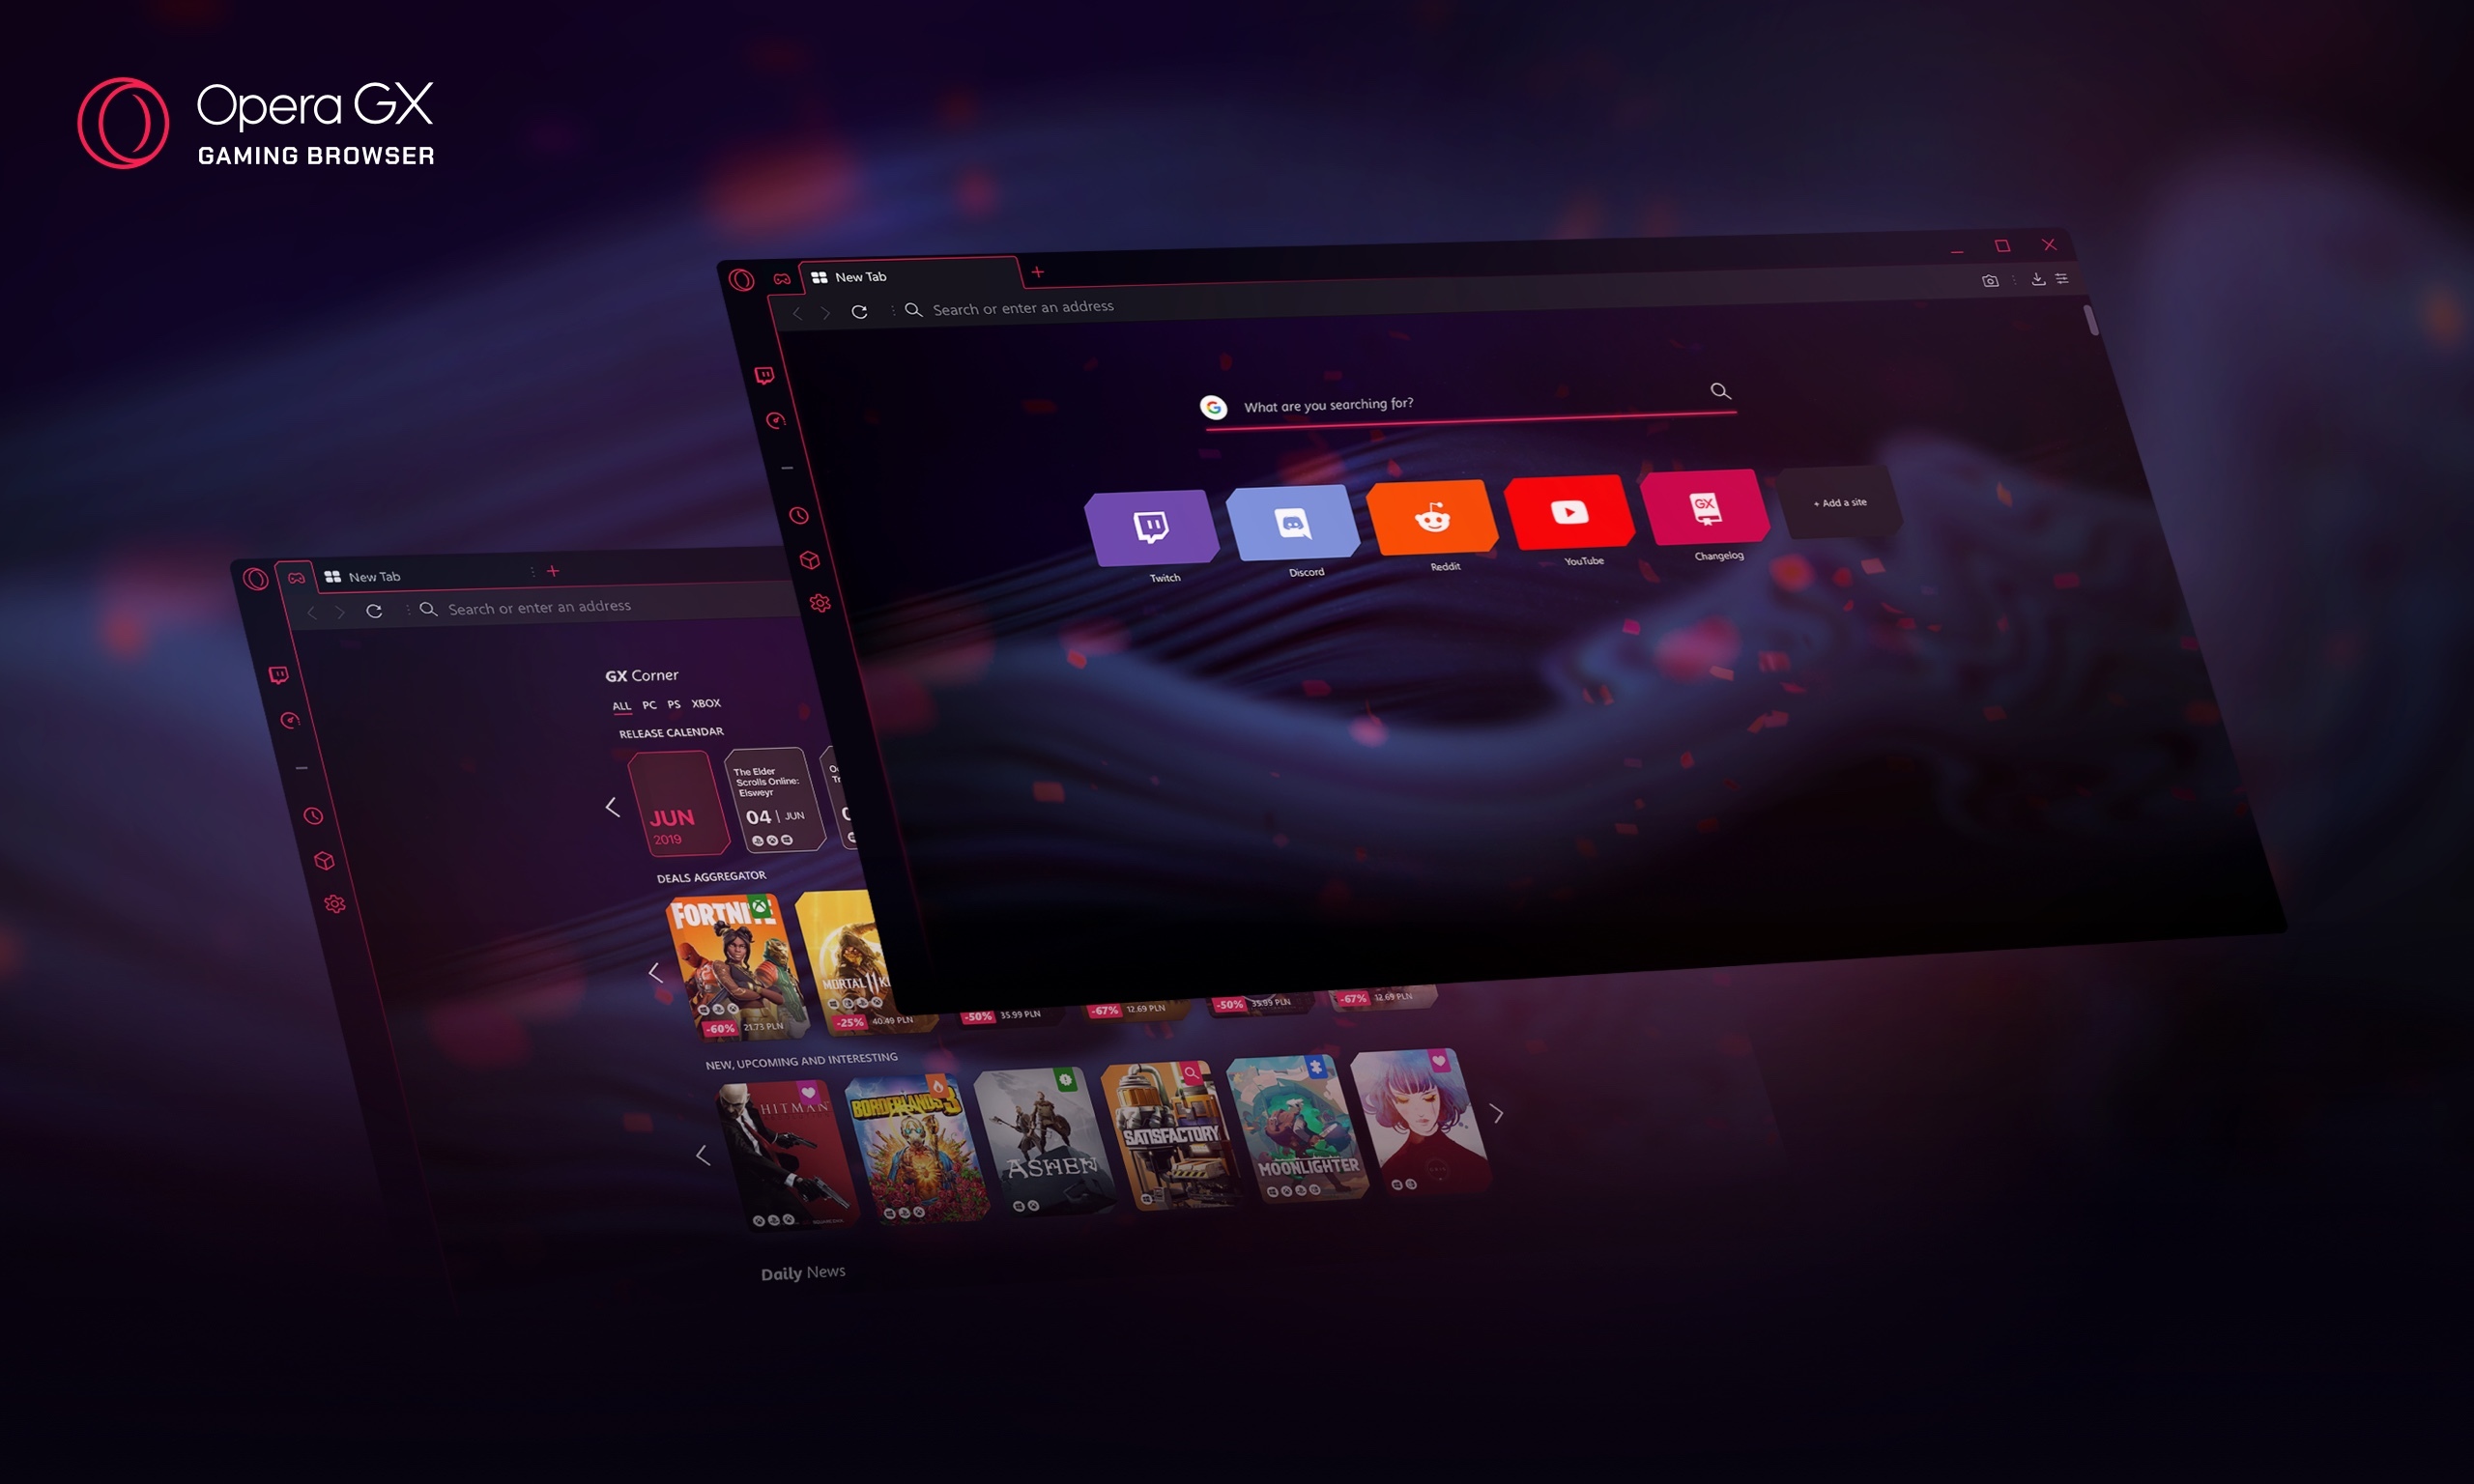 Getting to Know Opera GX, the World's First Gaming Browser